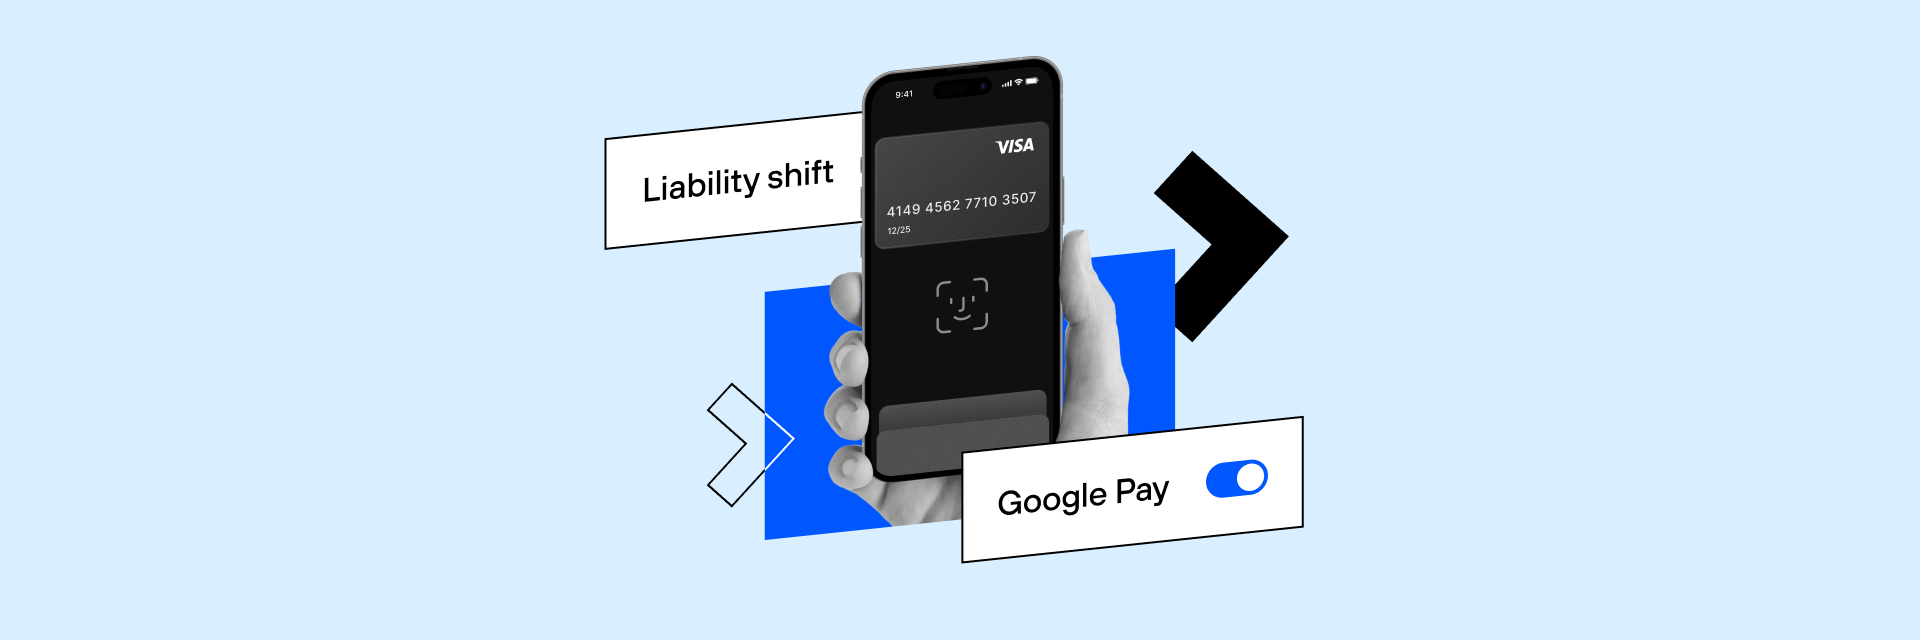 Google Pay Liability Shift Update — Now Available for Non-EU Visa Cards